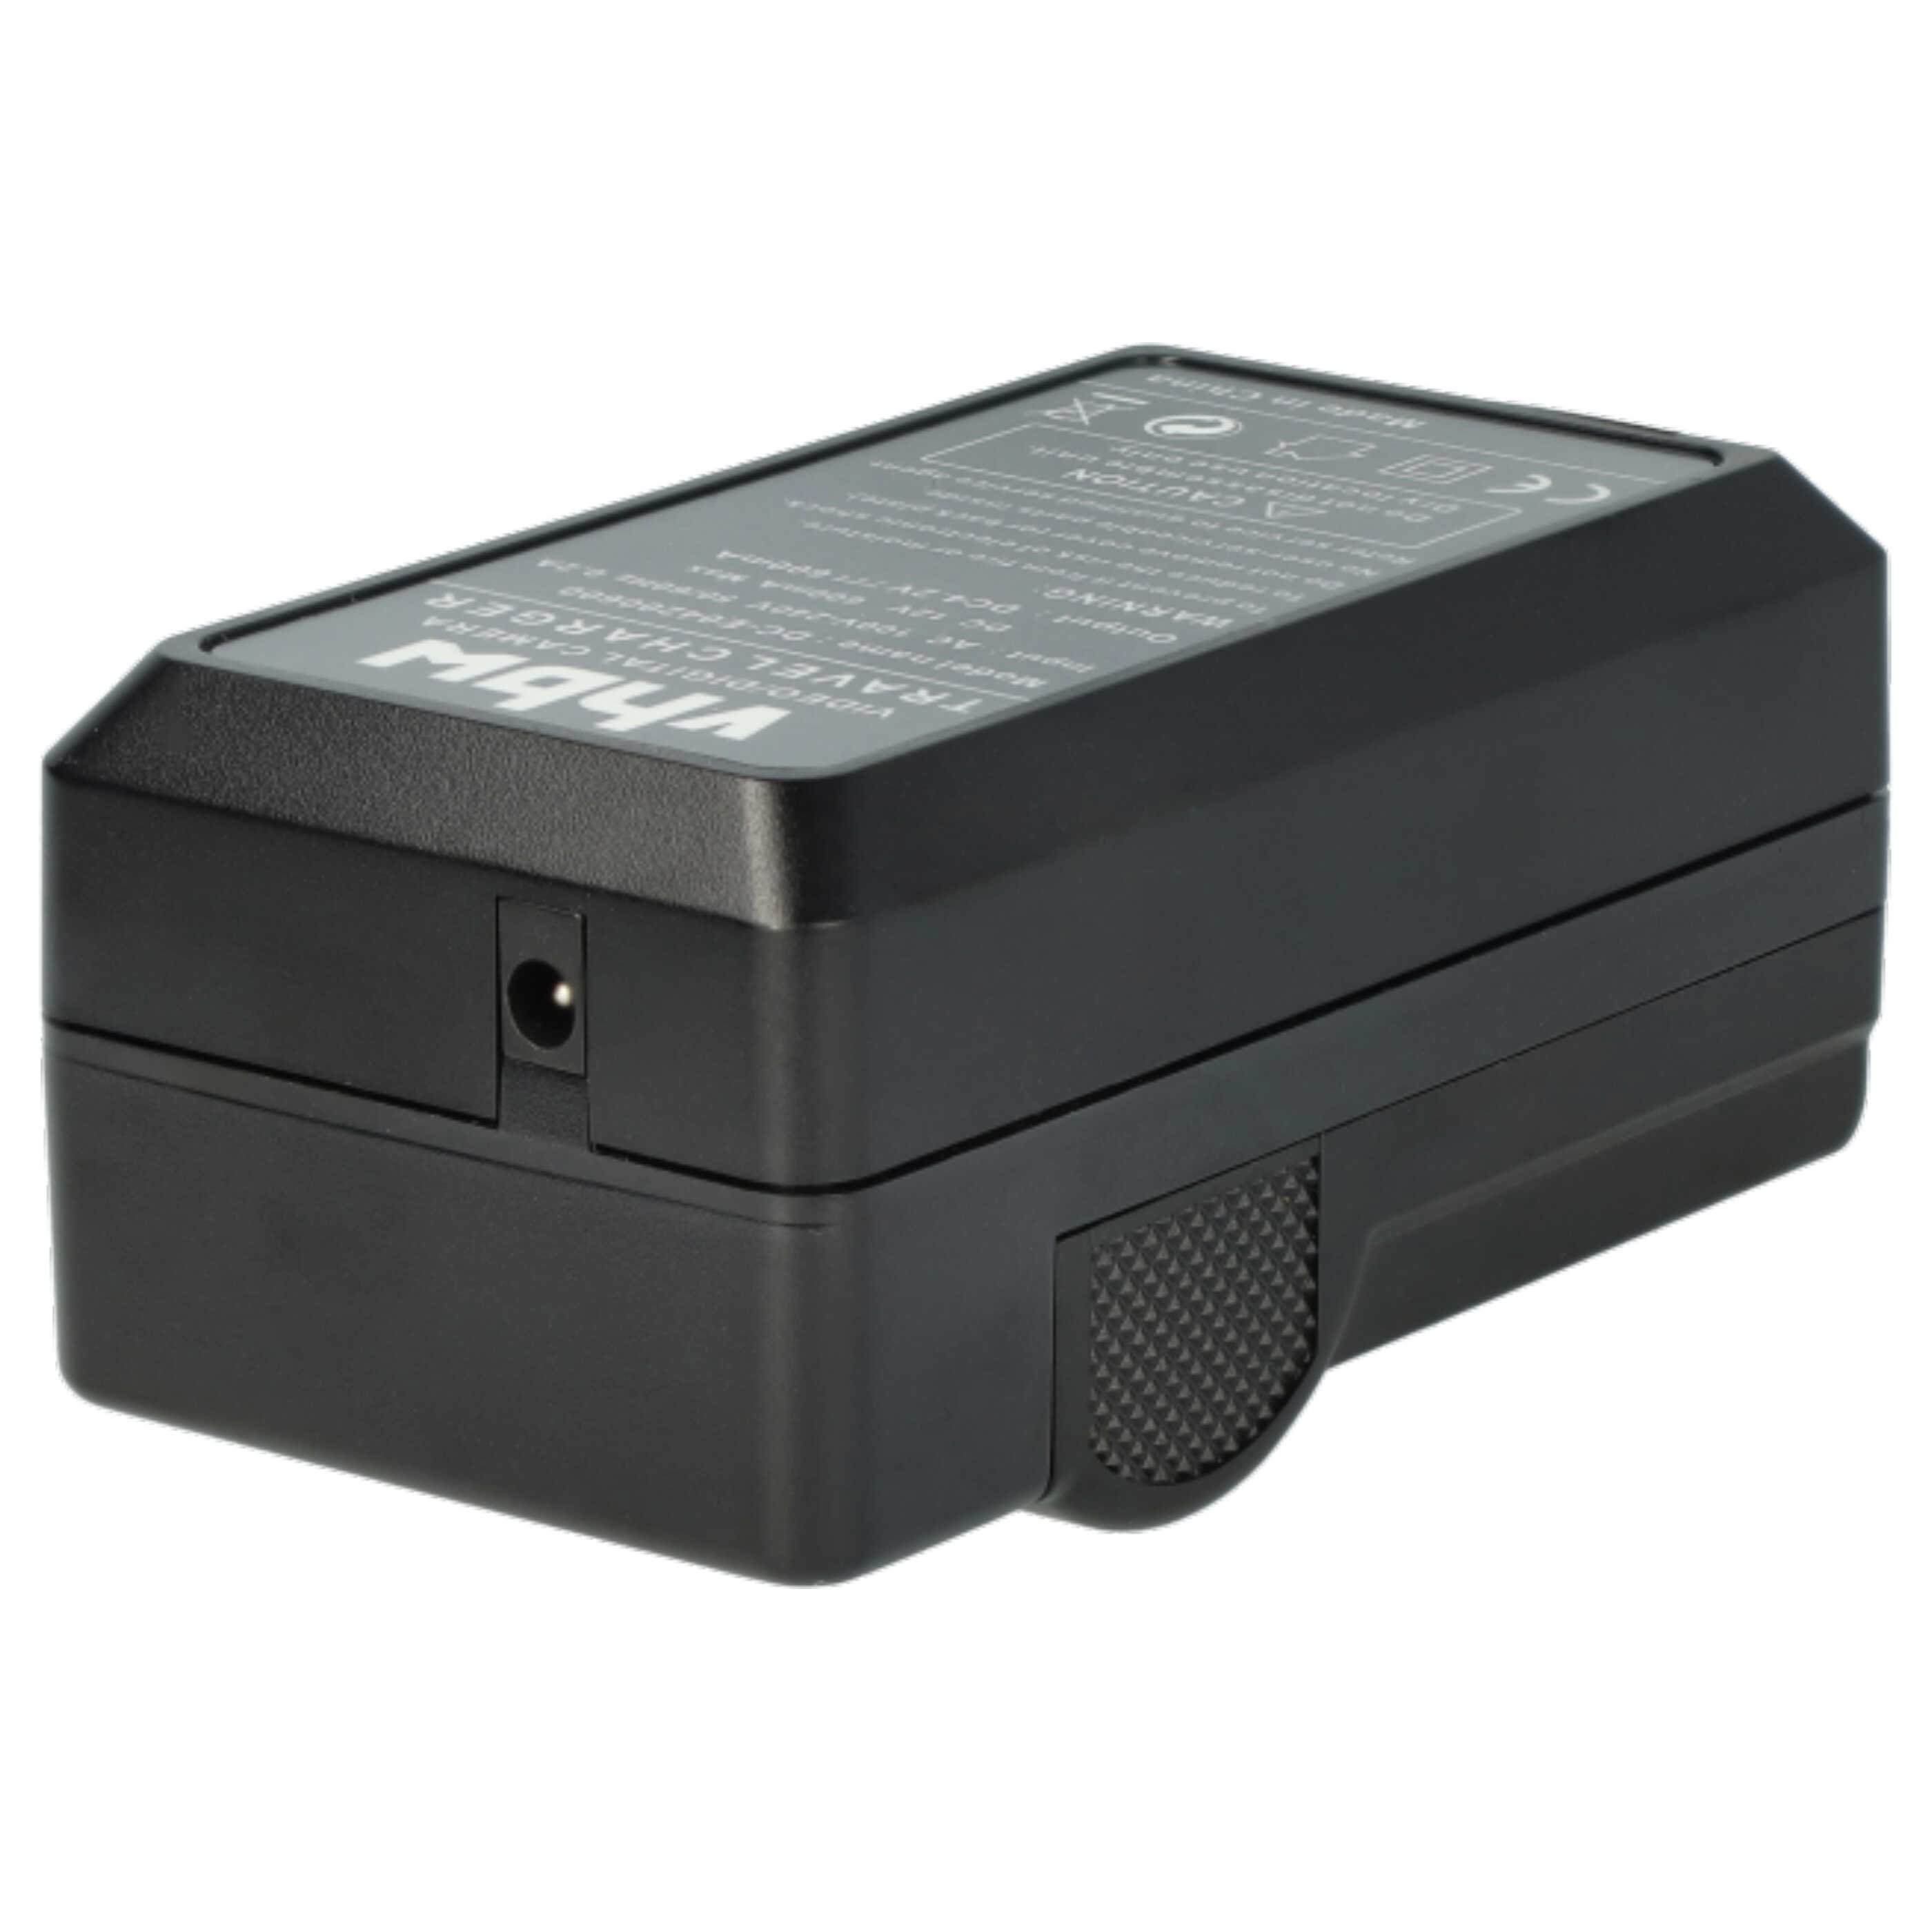 Battery Charger suitable for HX-DC2 Camera etc. - 0.6 A, 4.2 V